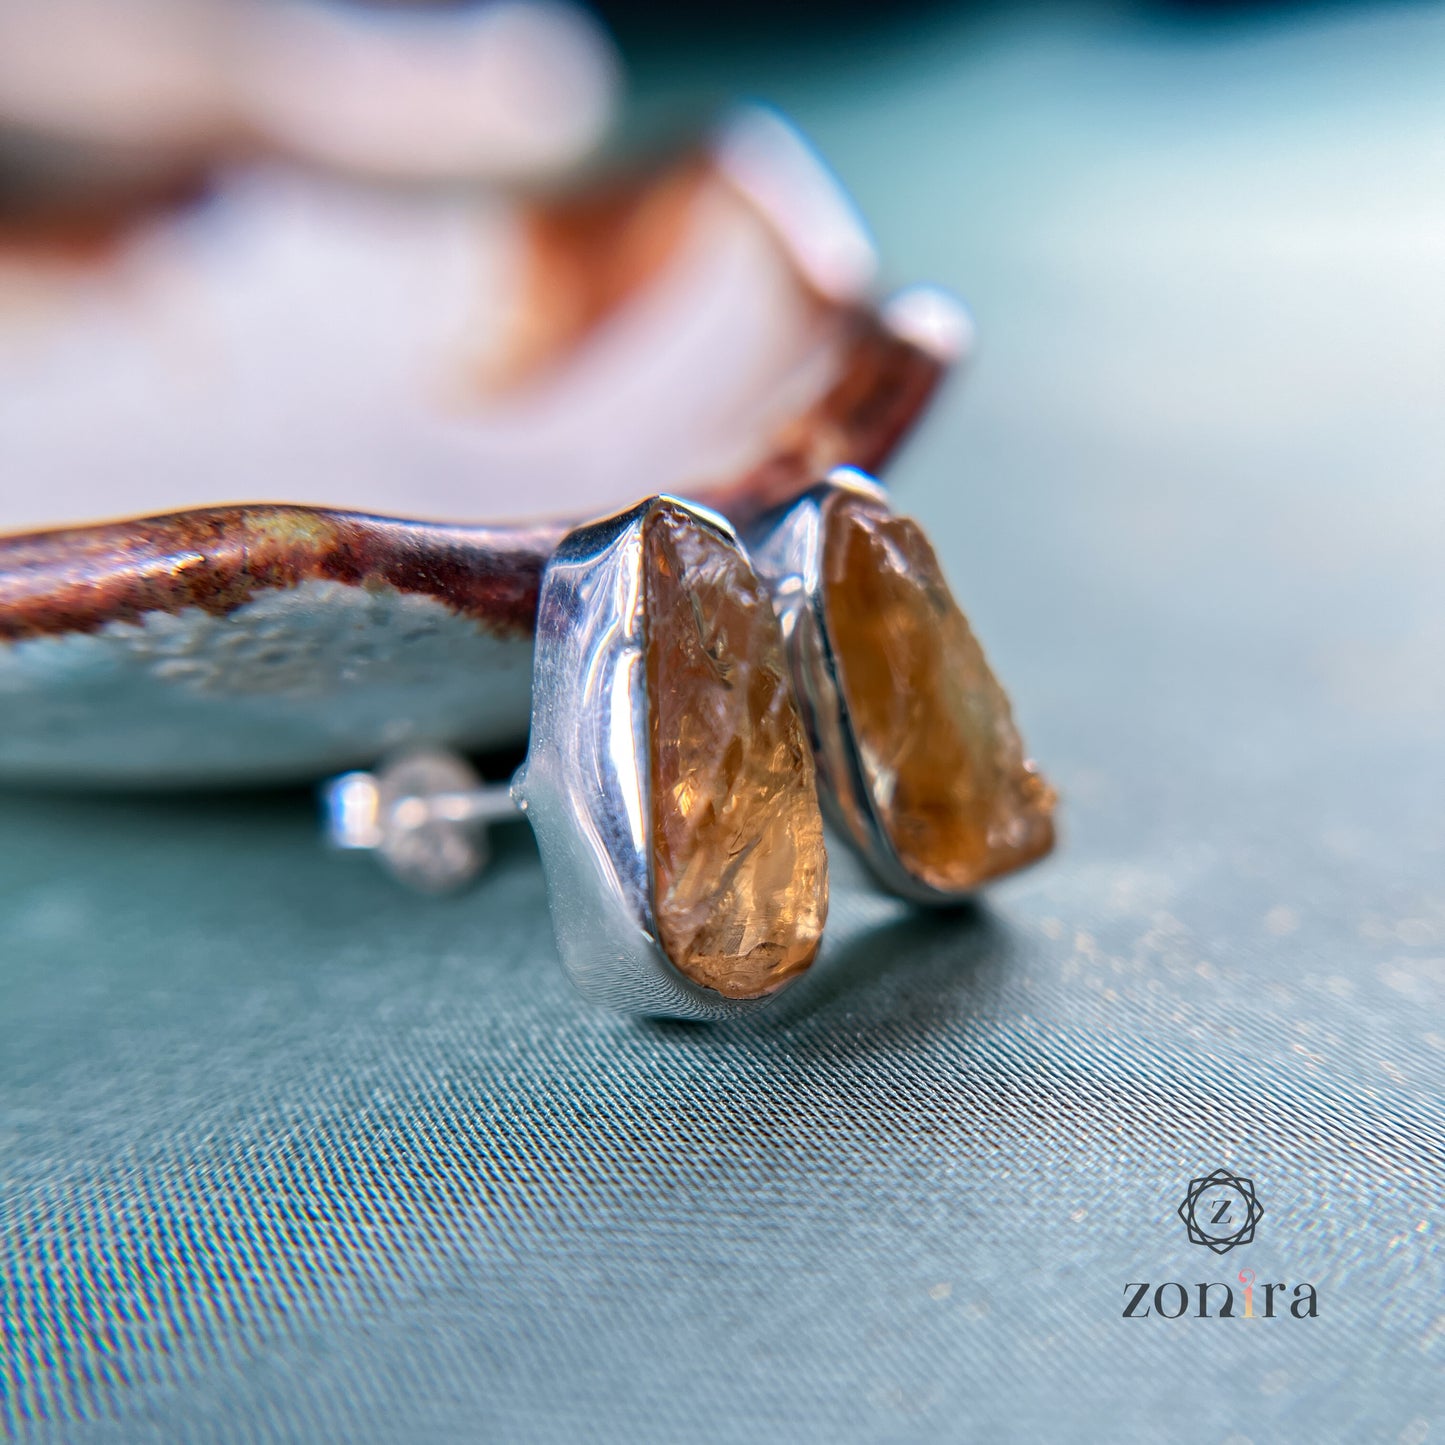 Aabis Silver Studs - Raw Citrine